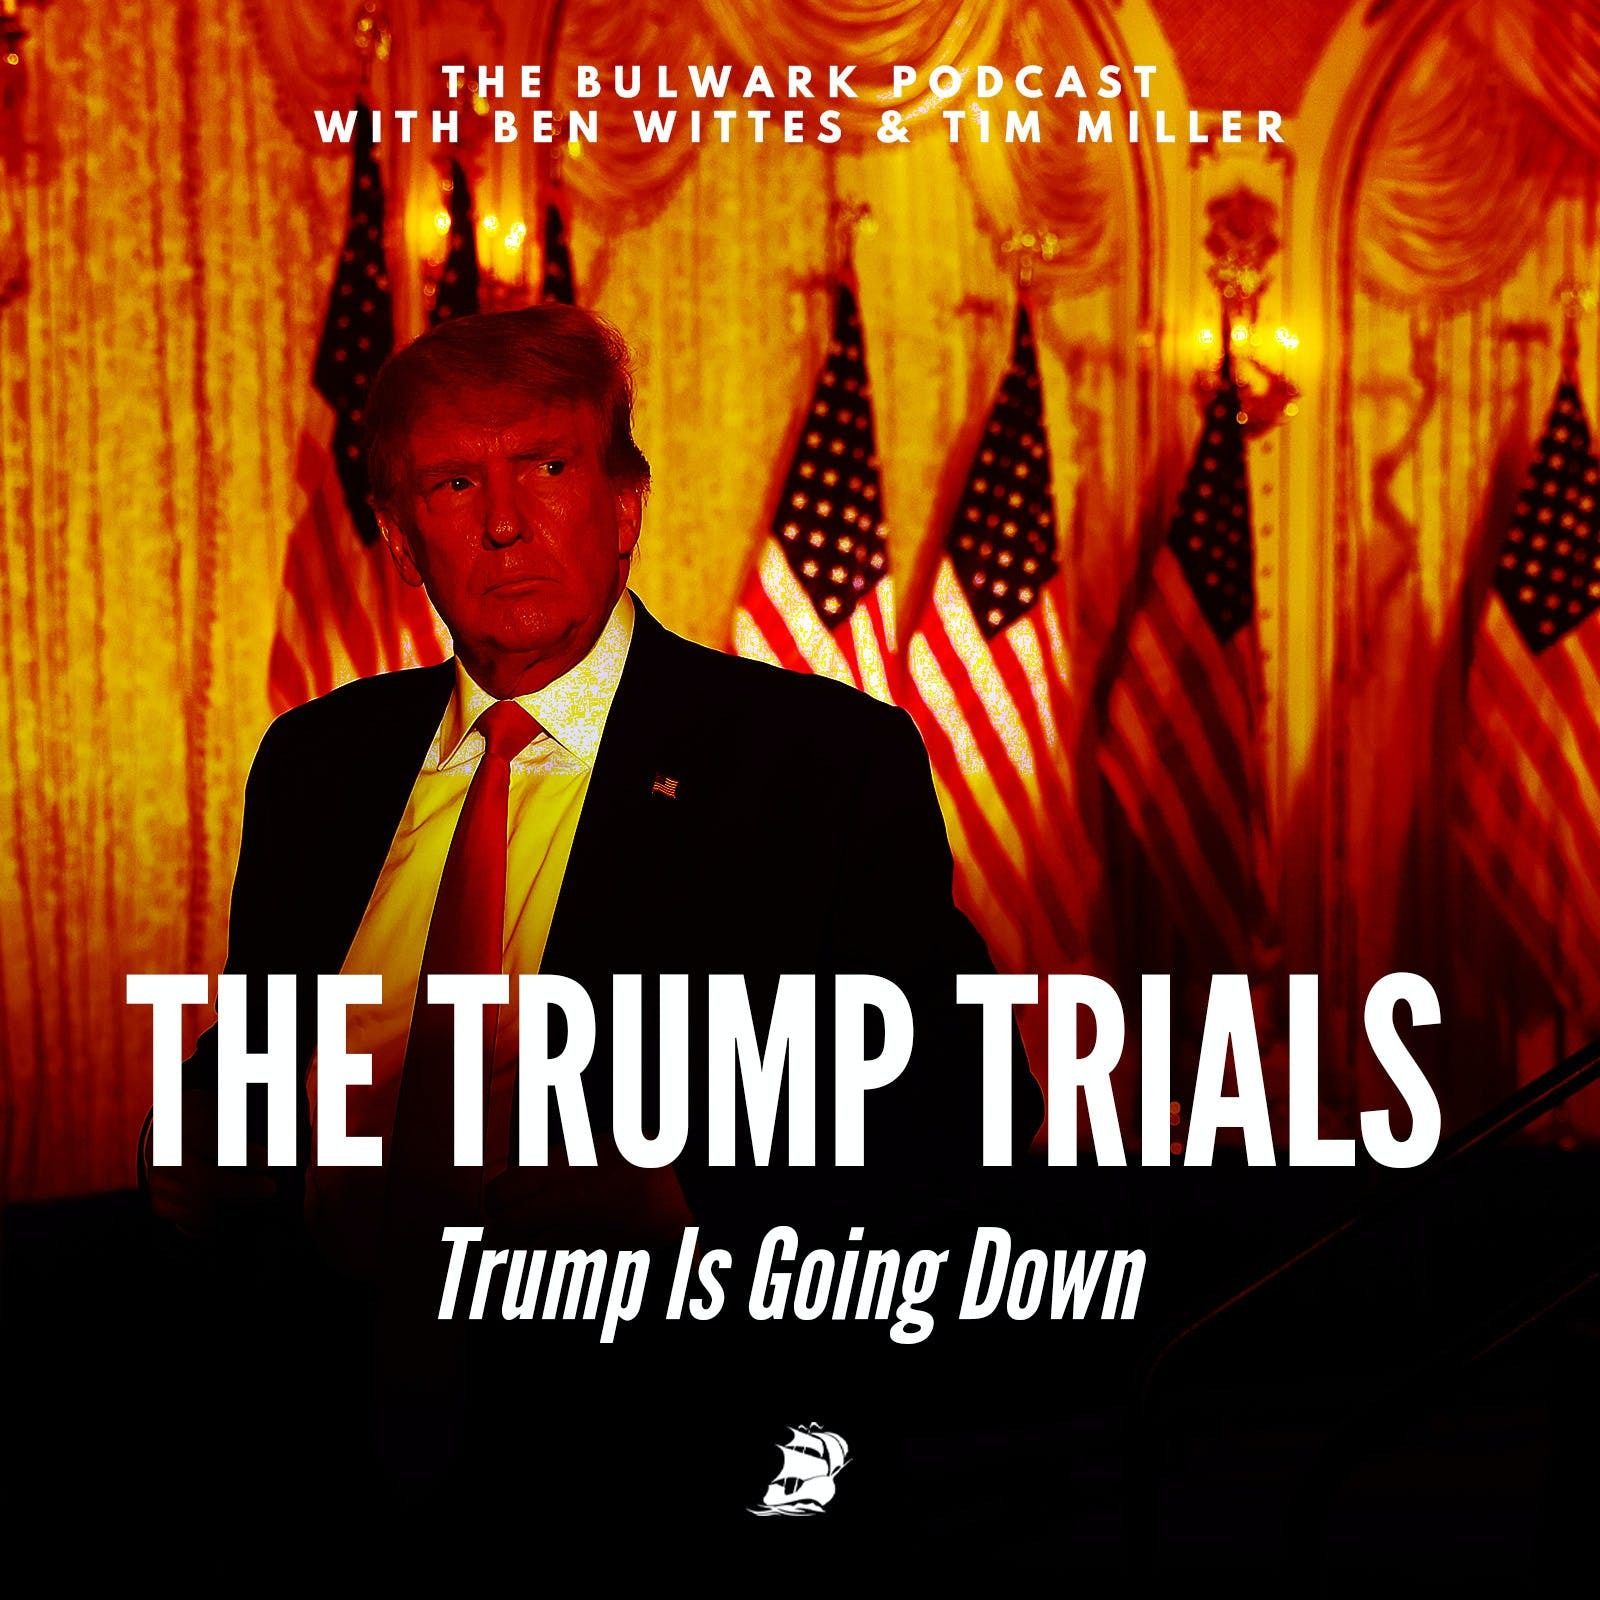 Trump Is Going Down by The Bulwark Podcast